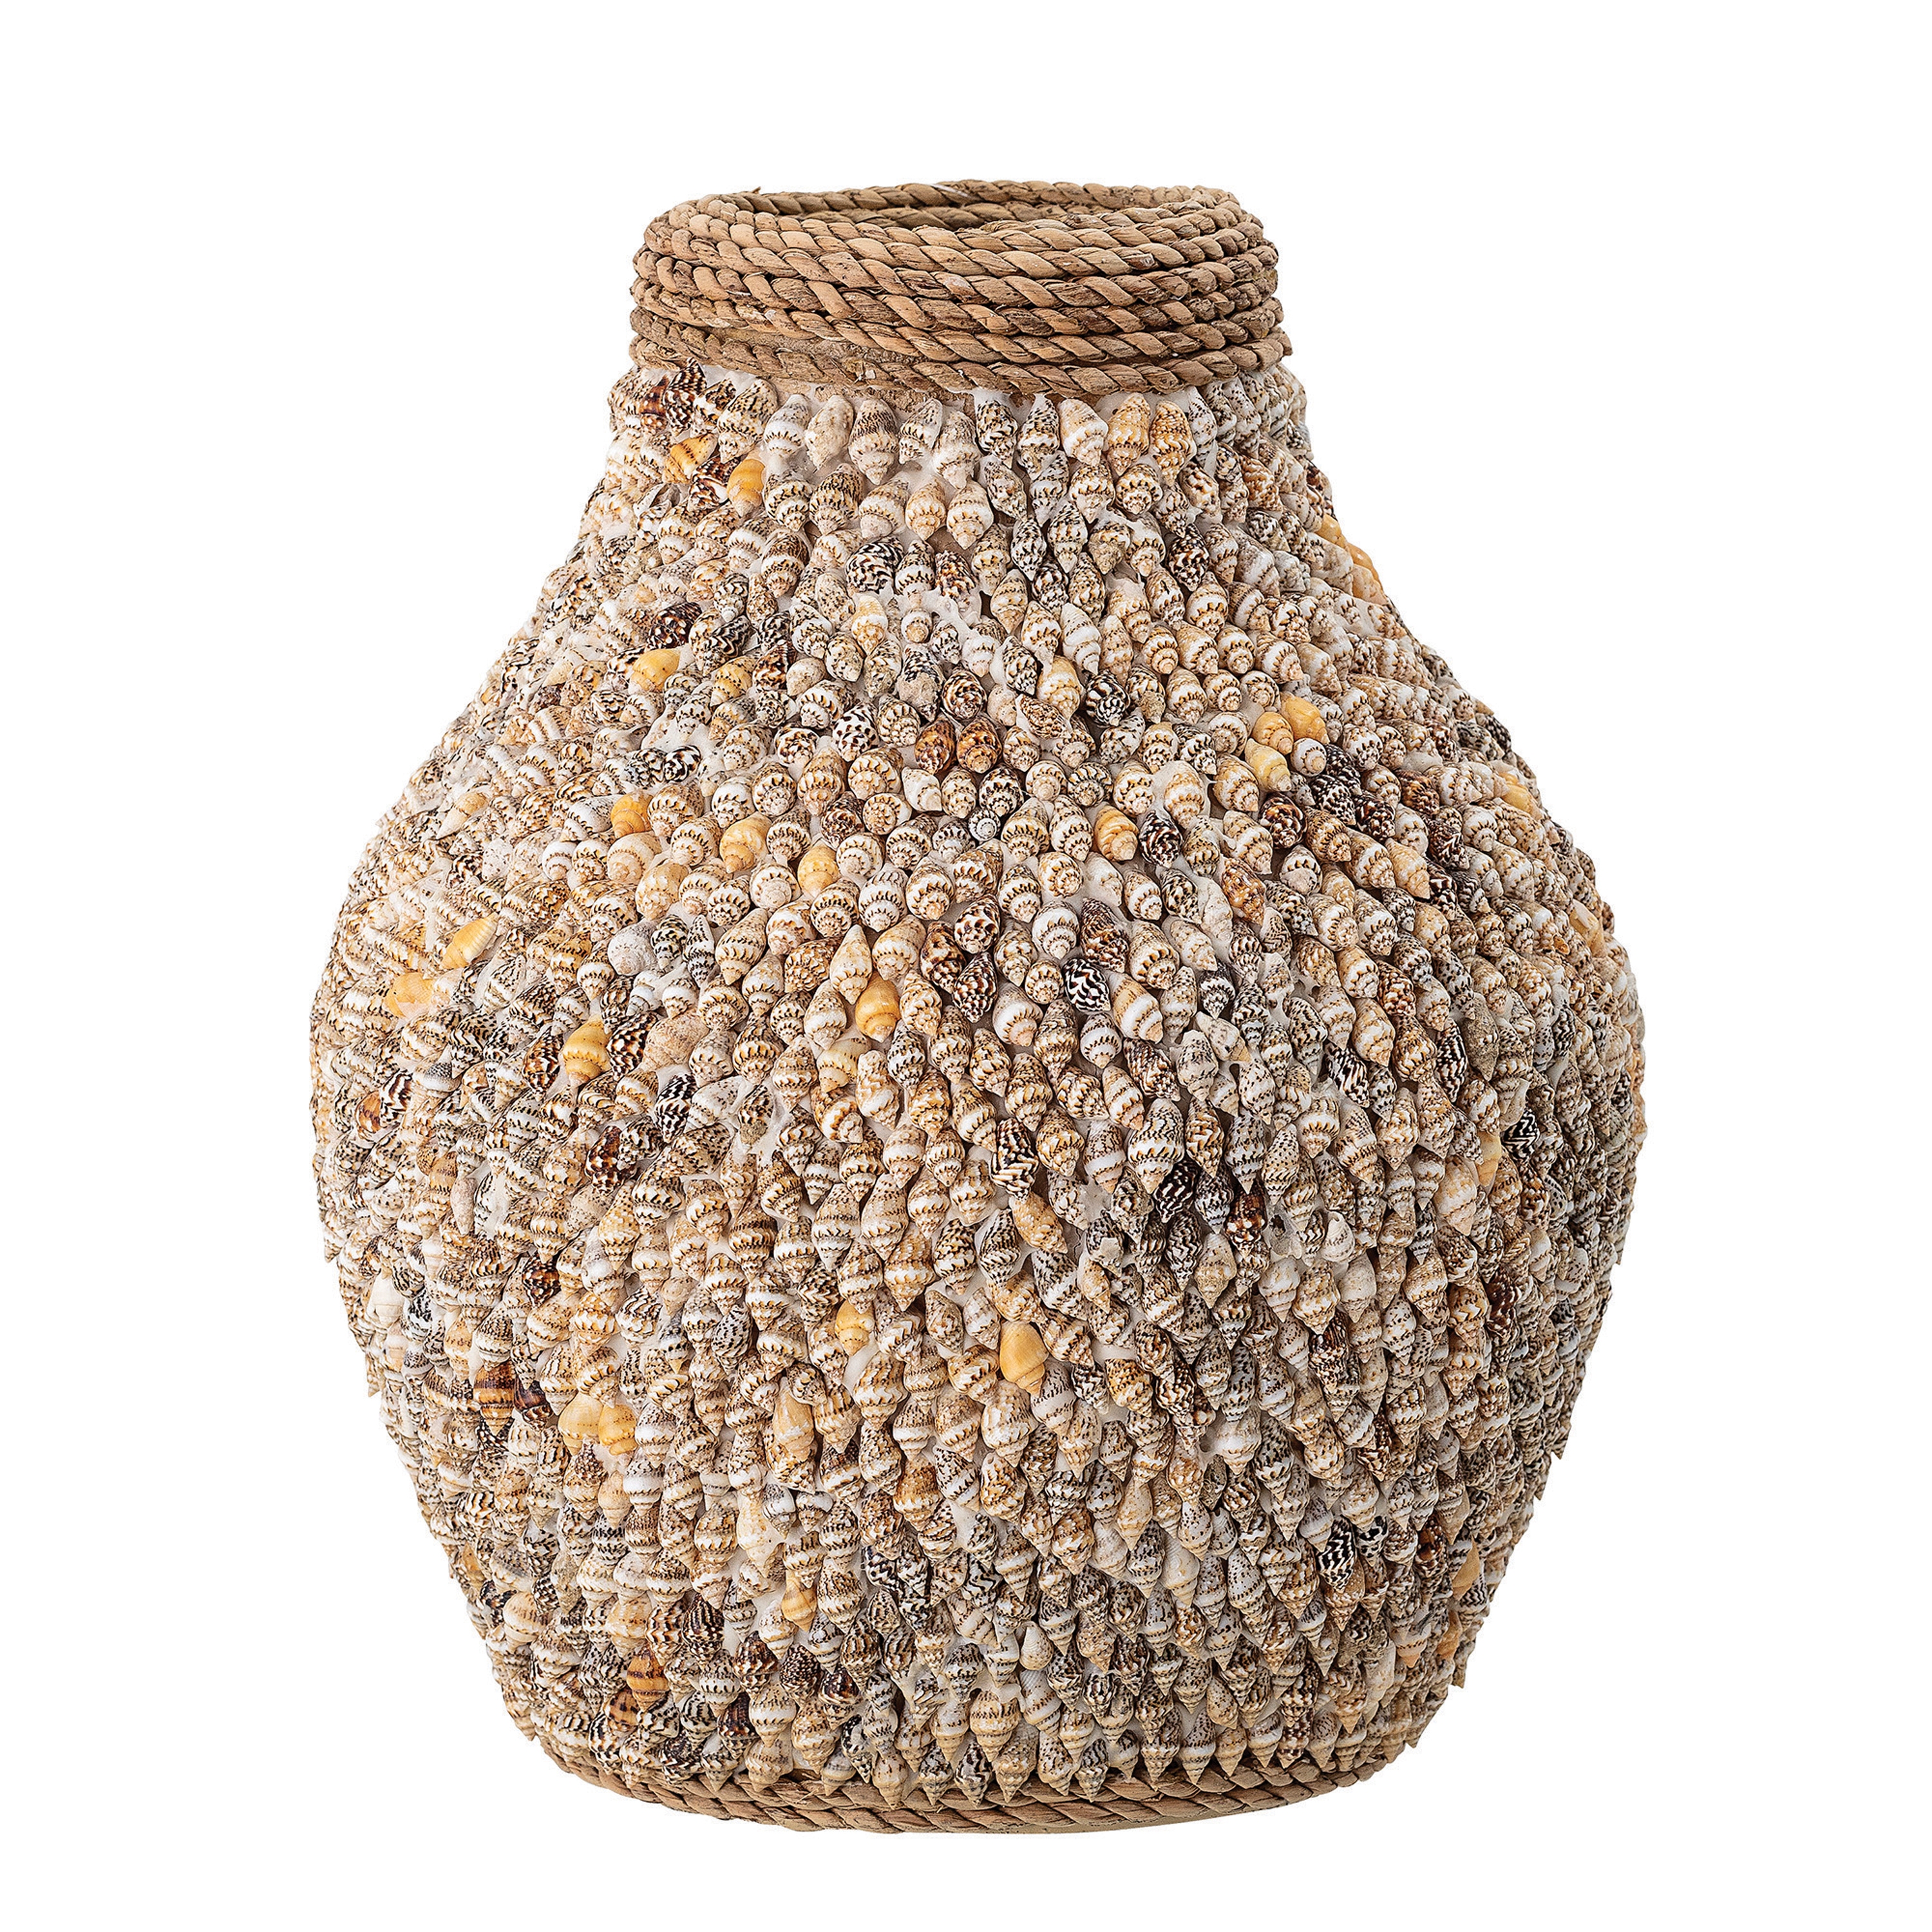 10.25" Shell Covered Vase with Rope Rim - Image 0